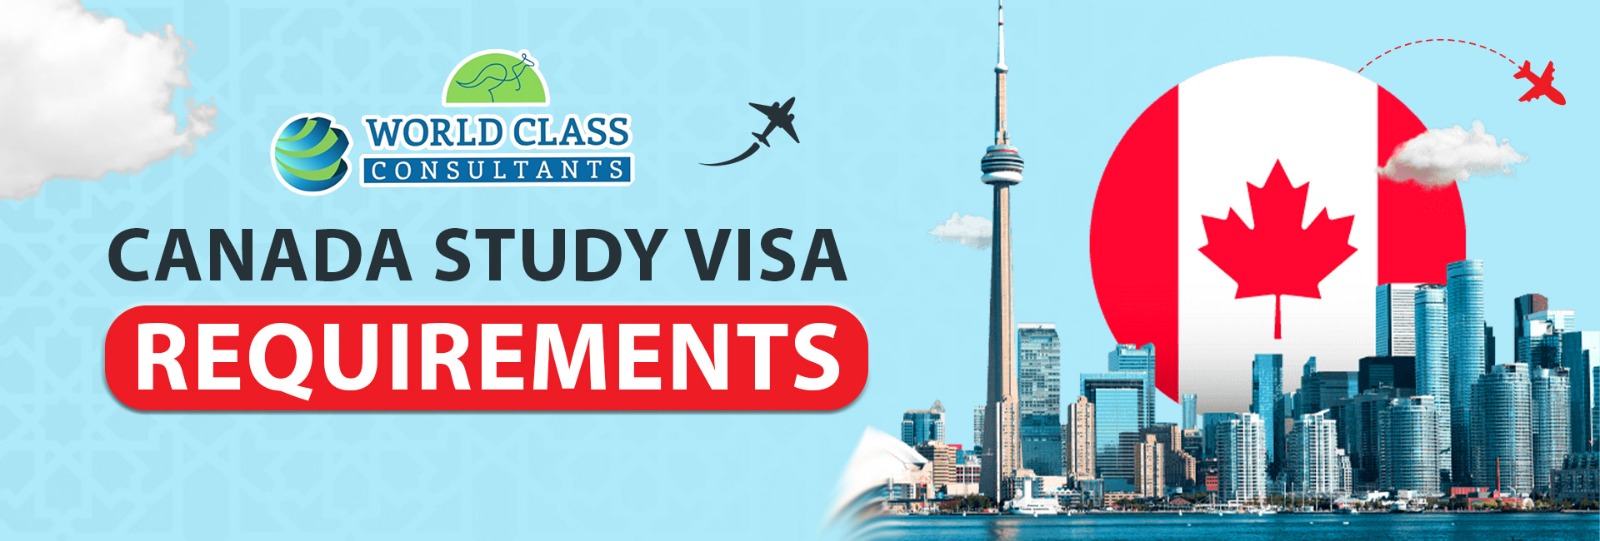 Canada study visa requirements: forms, passport, financial docs, acceptance letter from a Canadian institution, language proficiency proof